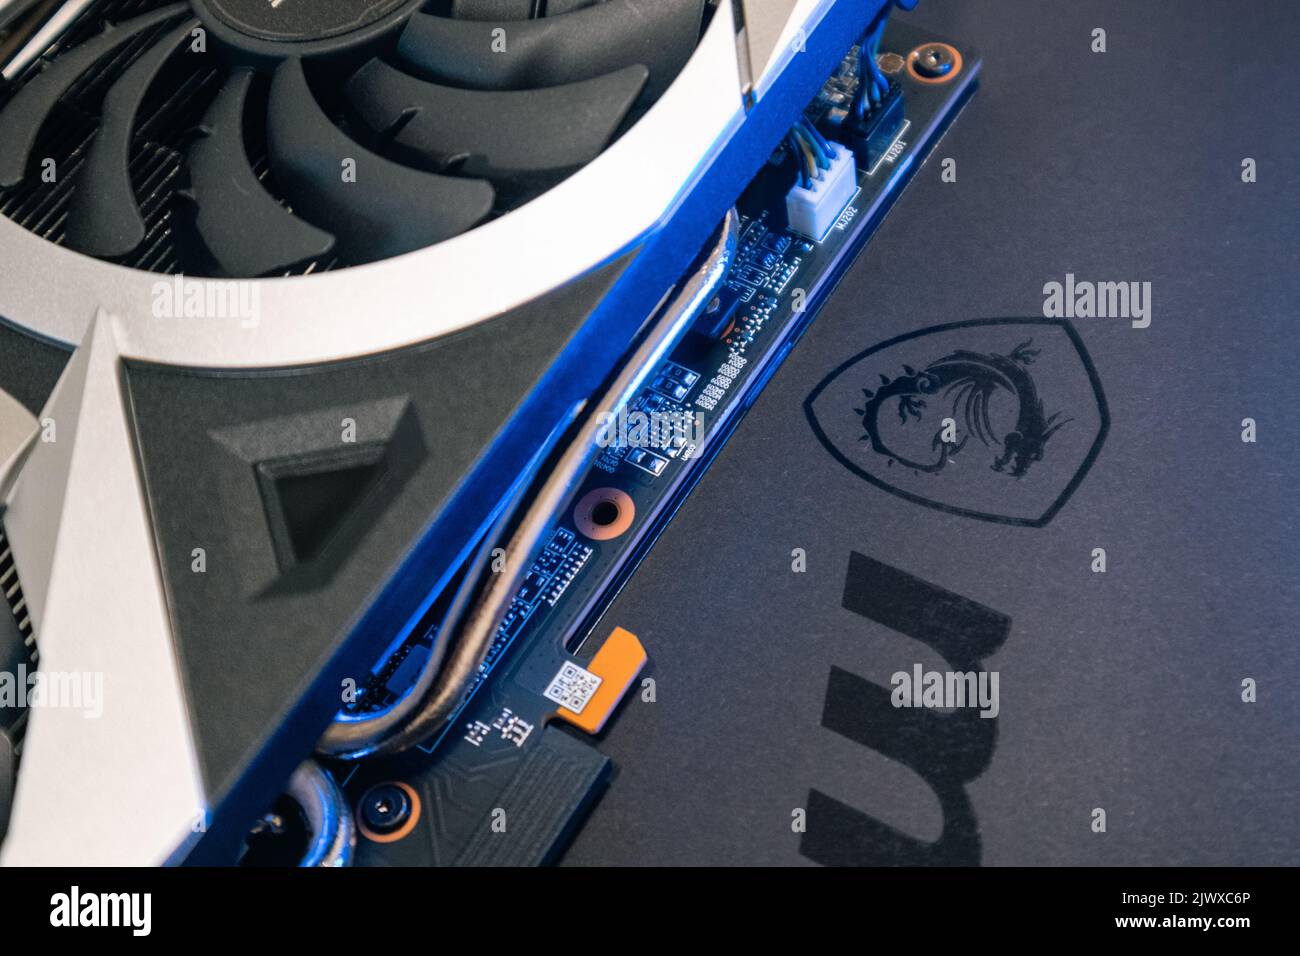 Kyiv, Ukraine - August 19, 2022: MSI logo and graphics card parts details in blue light, PC hardware close-up with selective focus Stock Photo